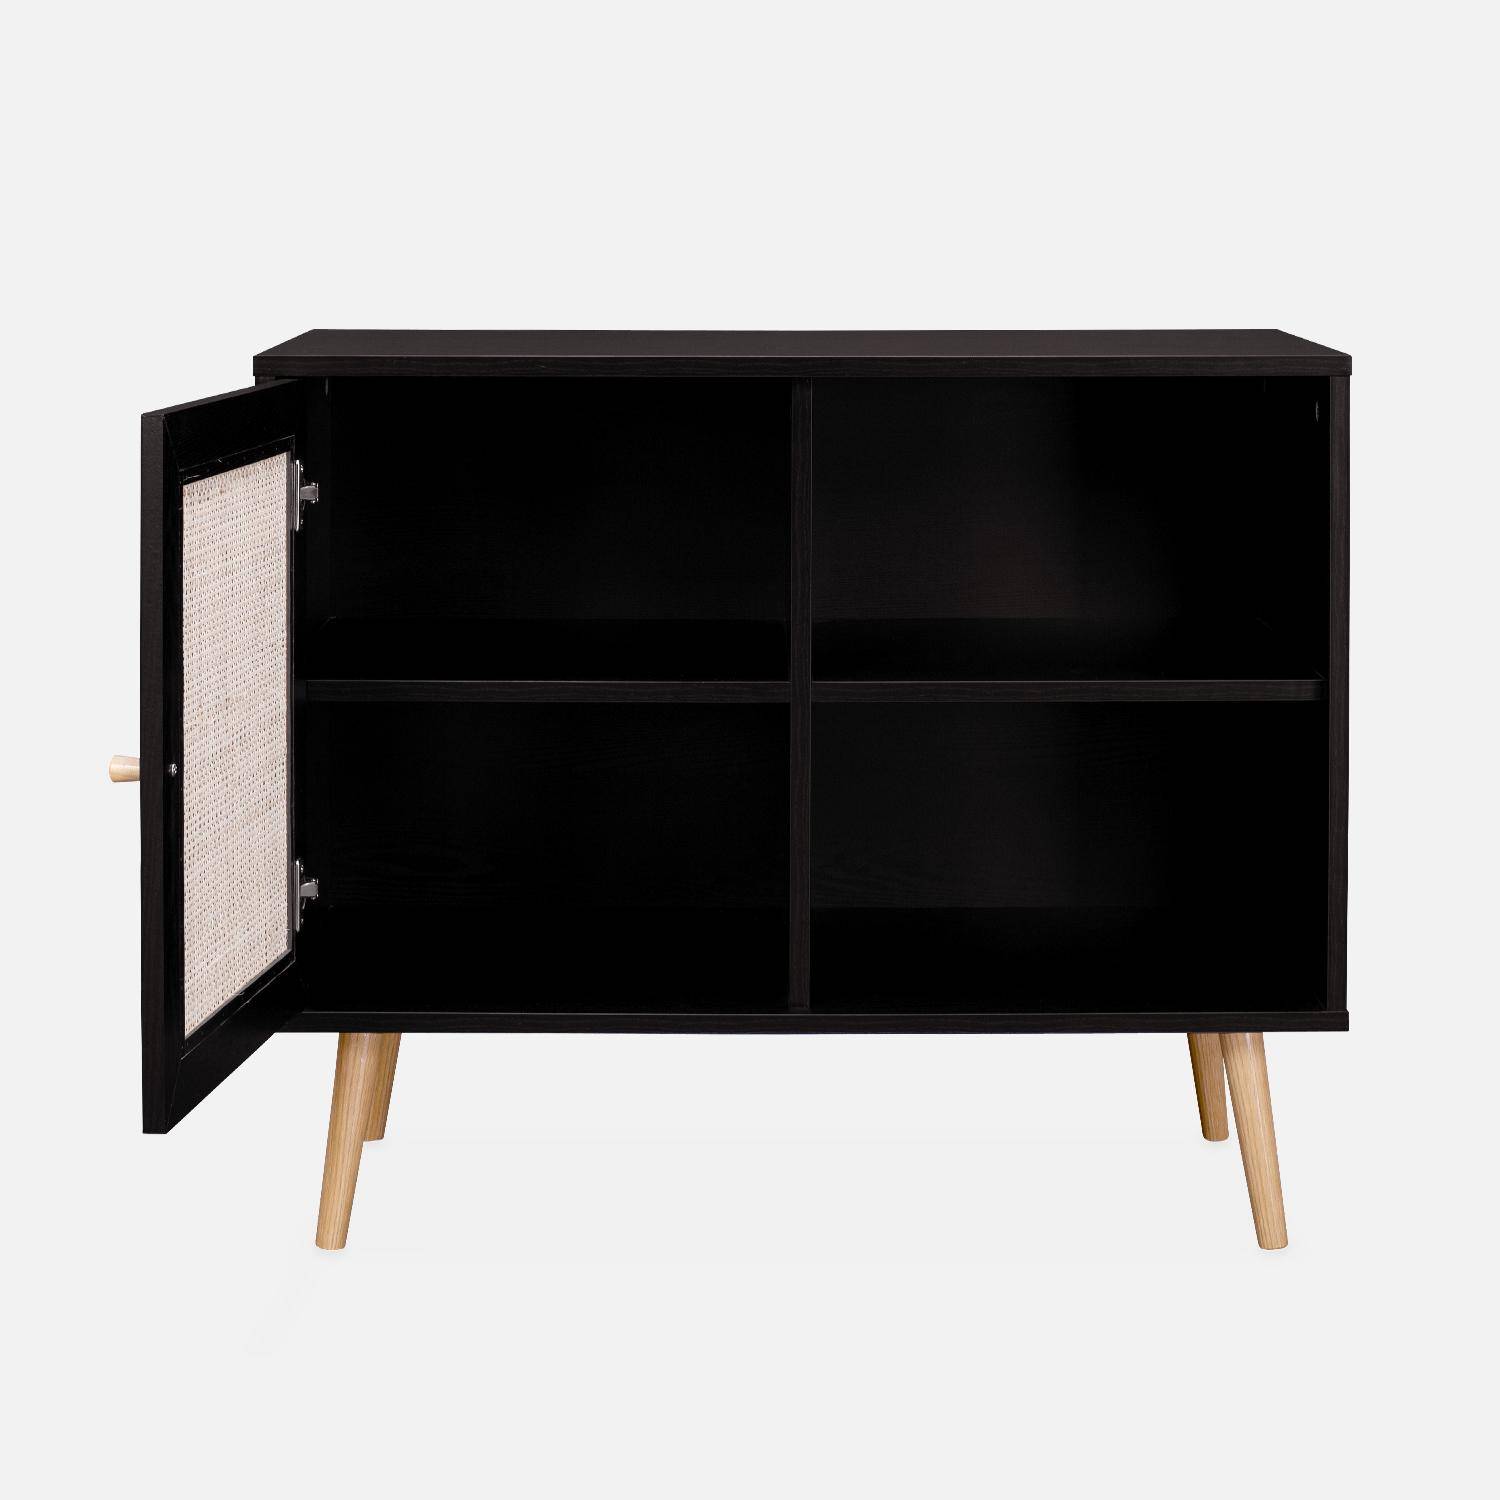 Wooden and cane rattan detail storage cabinet with 2 shelves, 1 cupboard, Scandi-style legs, 80x39x65.8cm - Boheme - Black Photo4